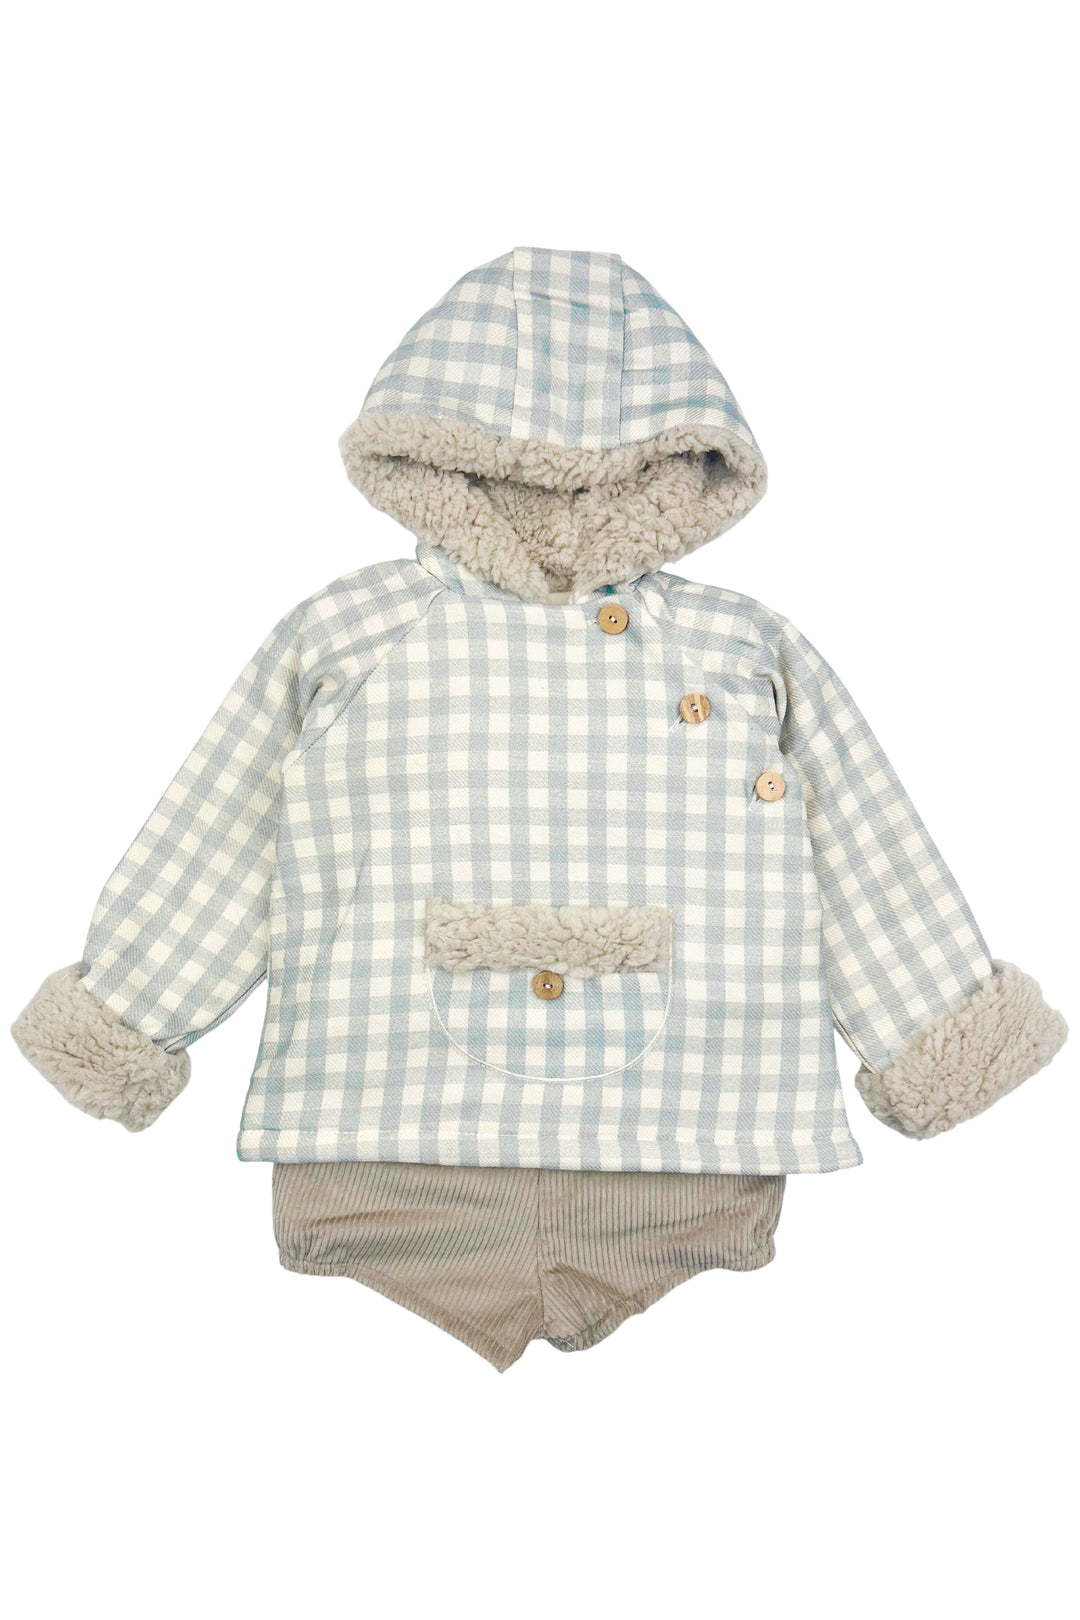 Valentina Bebes "Coby" Blue Gingham Hoodie & Cord Shorts | Millie and John